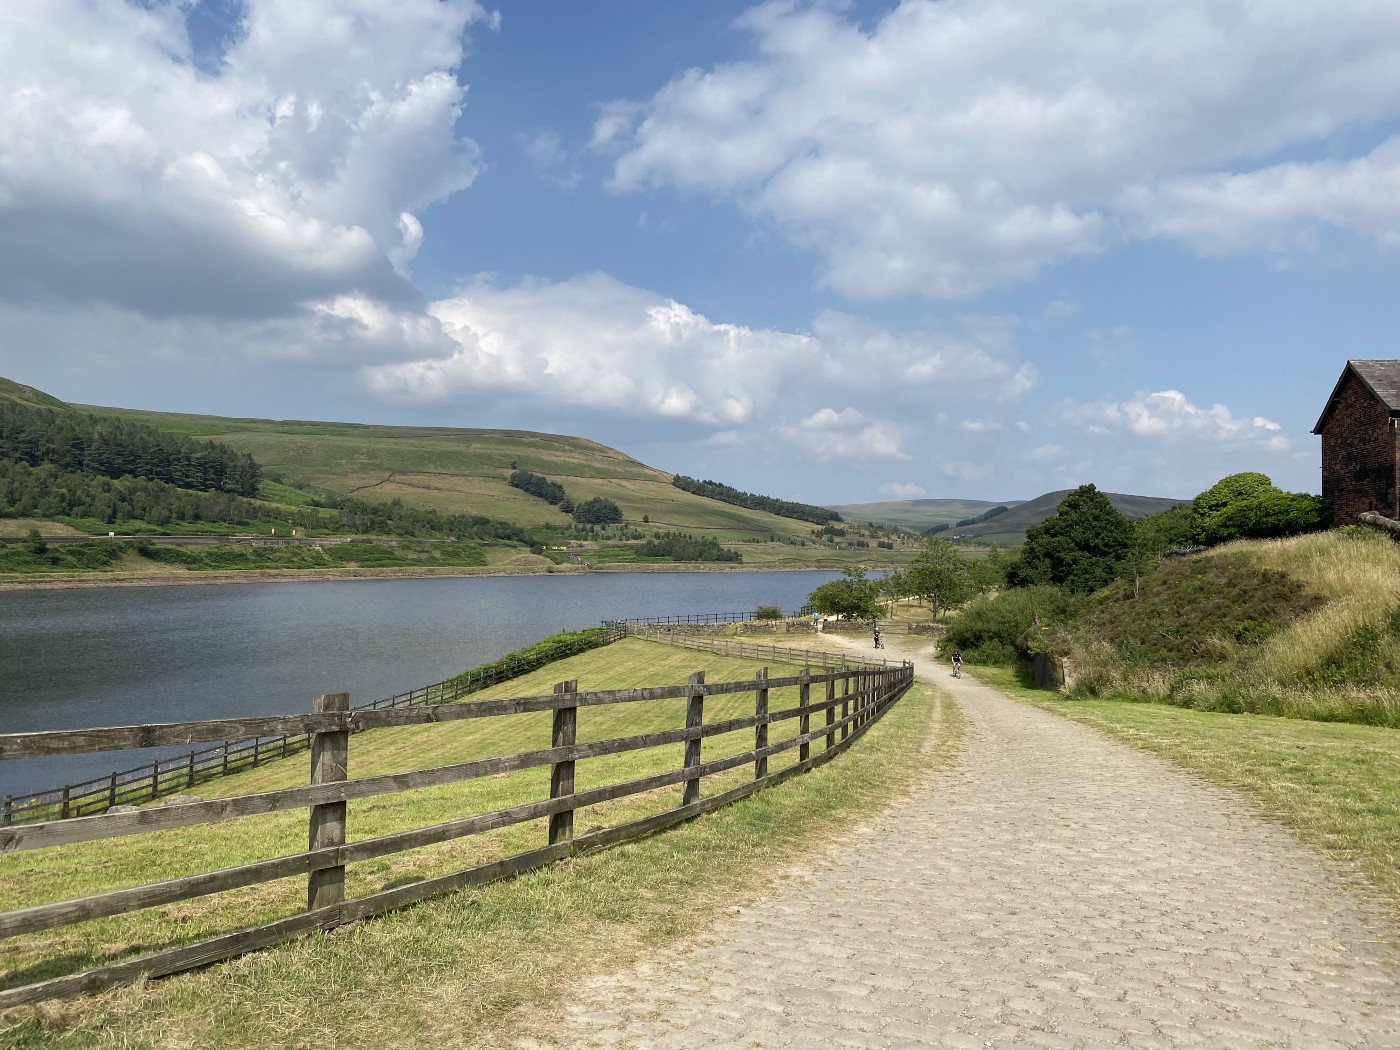 Wide cobbled bridleway above a reservoir on the Trans-Pennine Trail